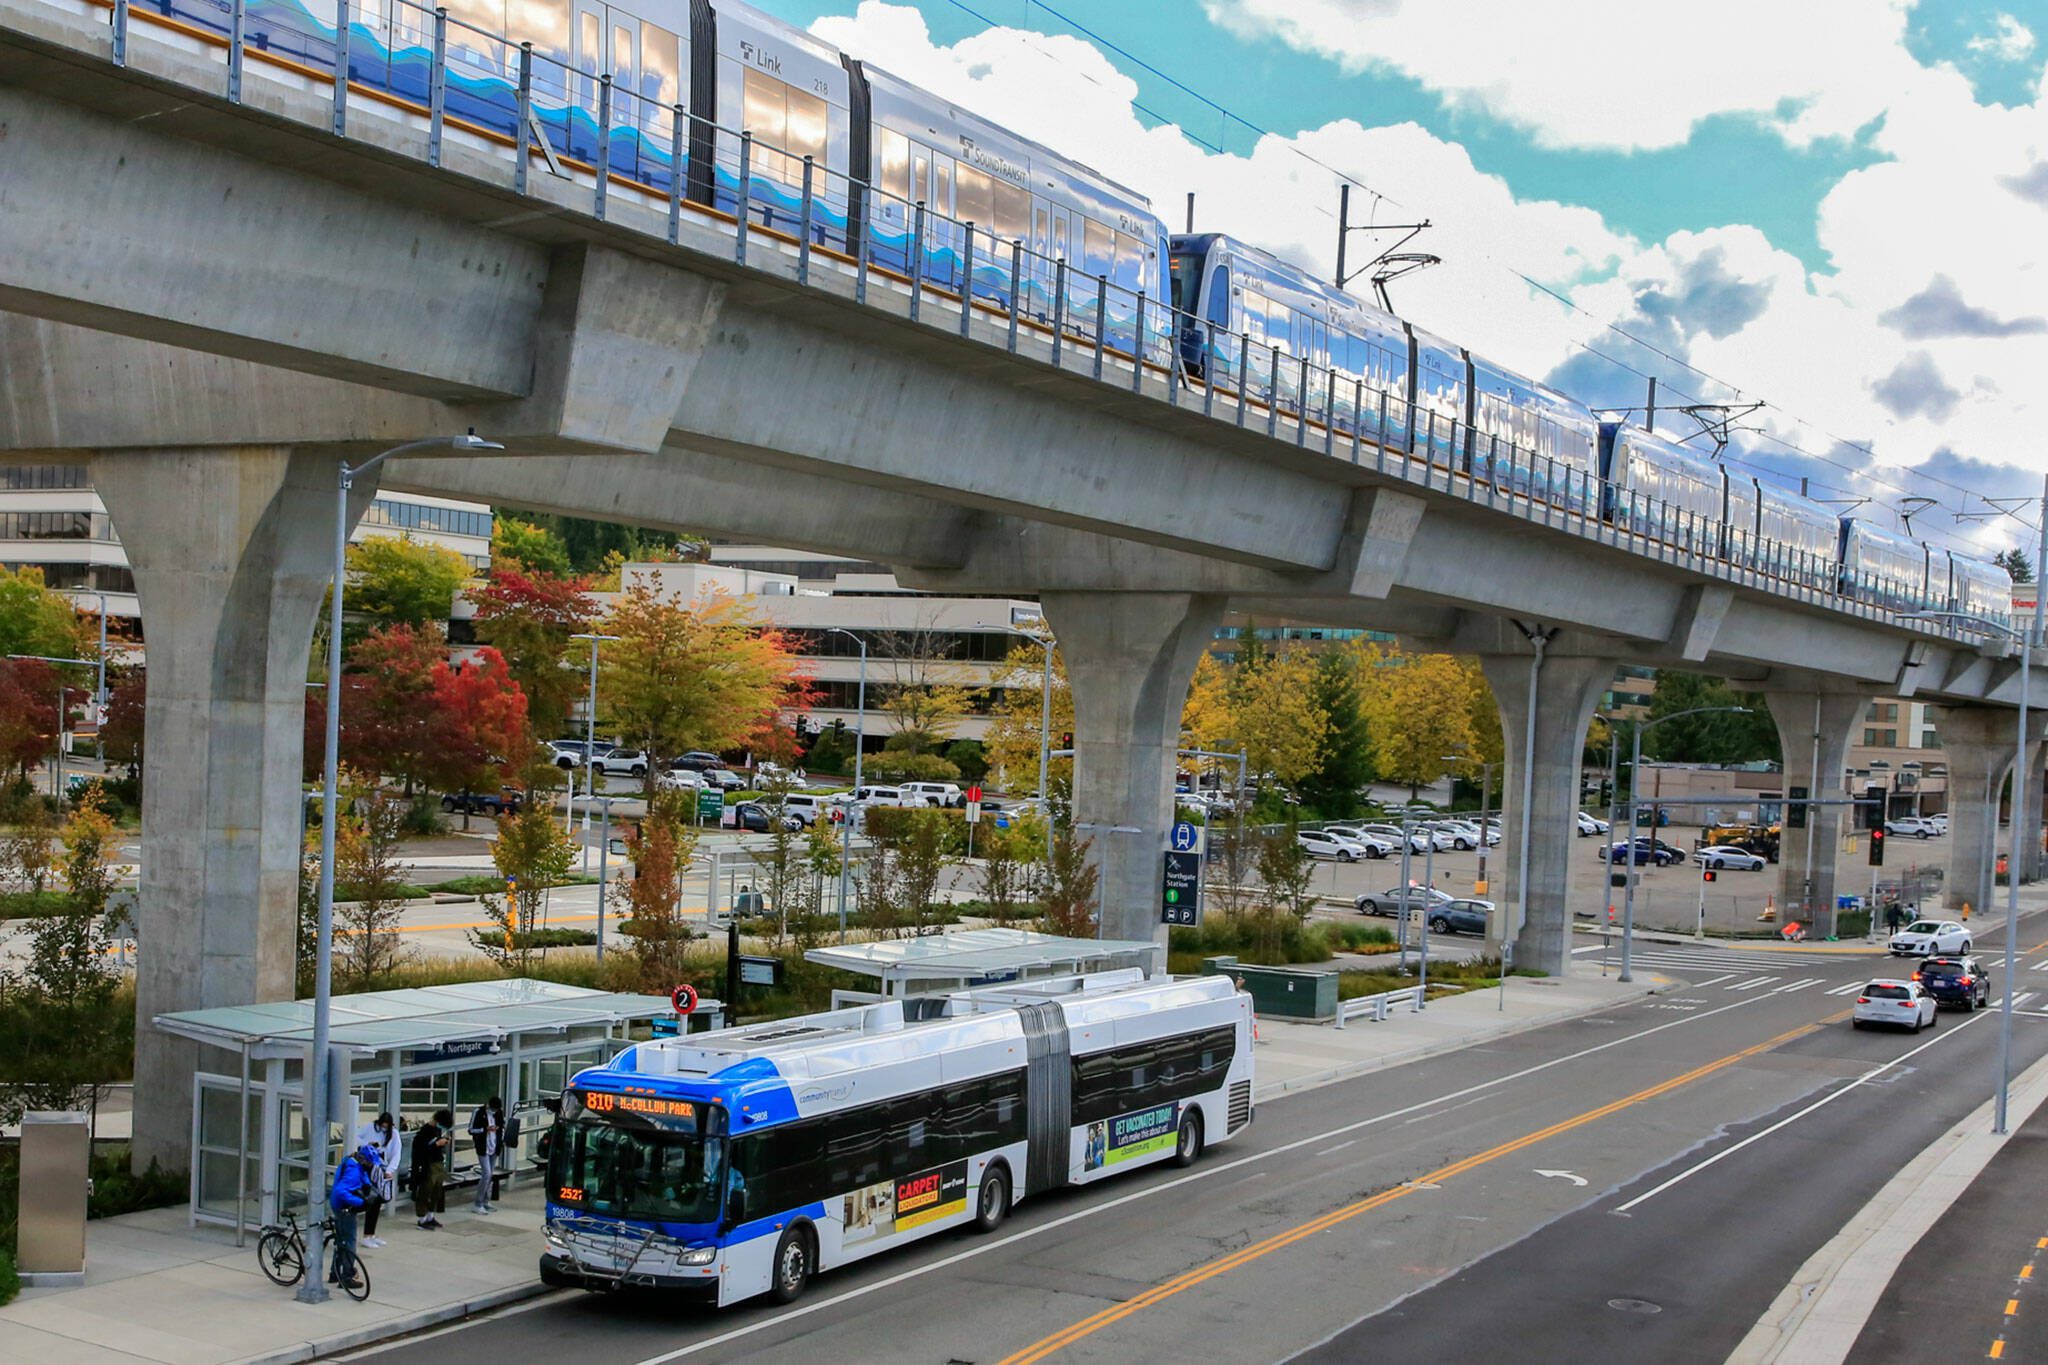 The 810 McCollum Park Community Transit bus at it’s stop in the shadow of the Northgate Light Rail Station in Seattle, Washington. (Kevin Clark / The Herald)